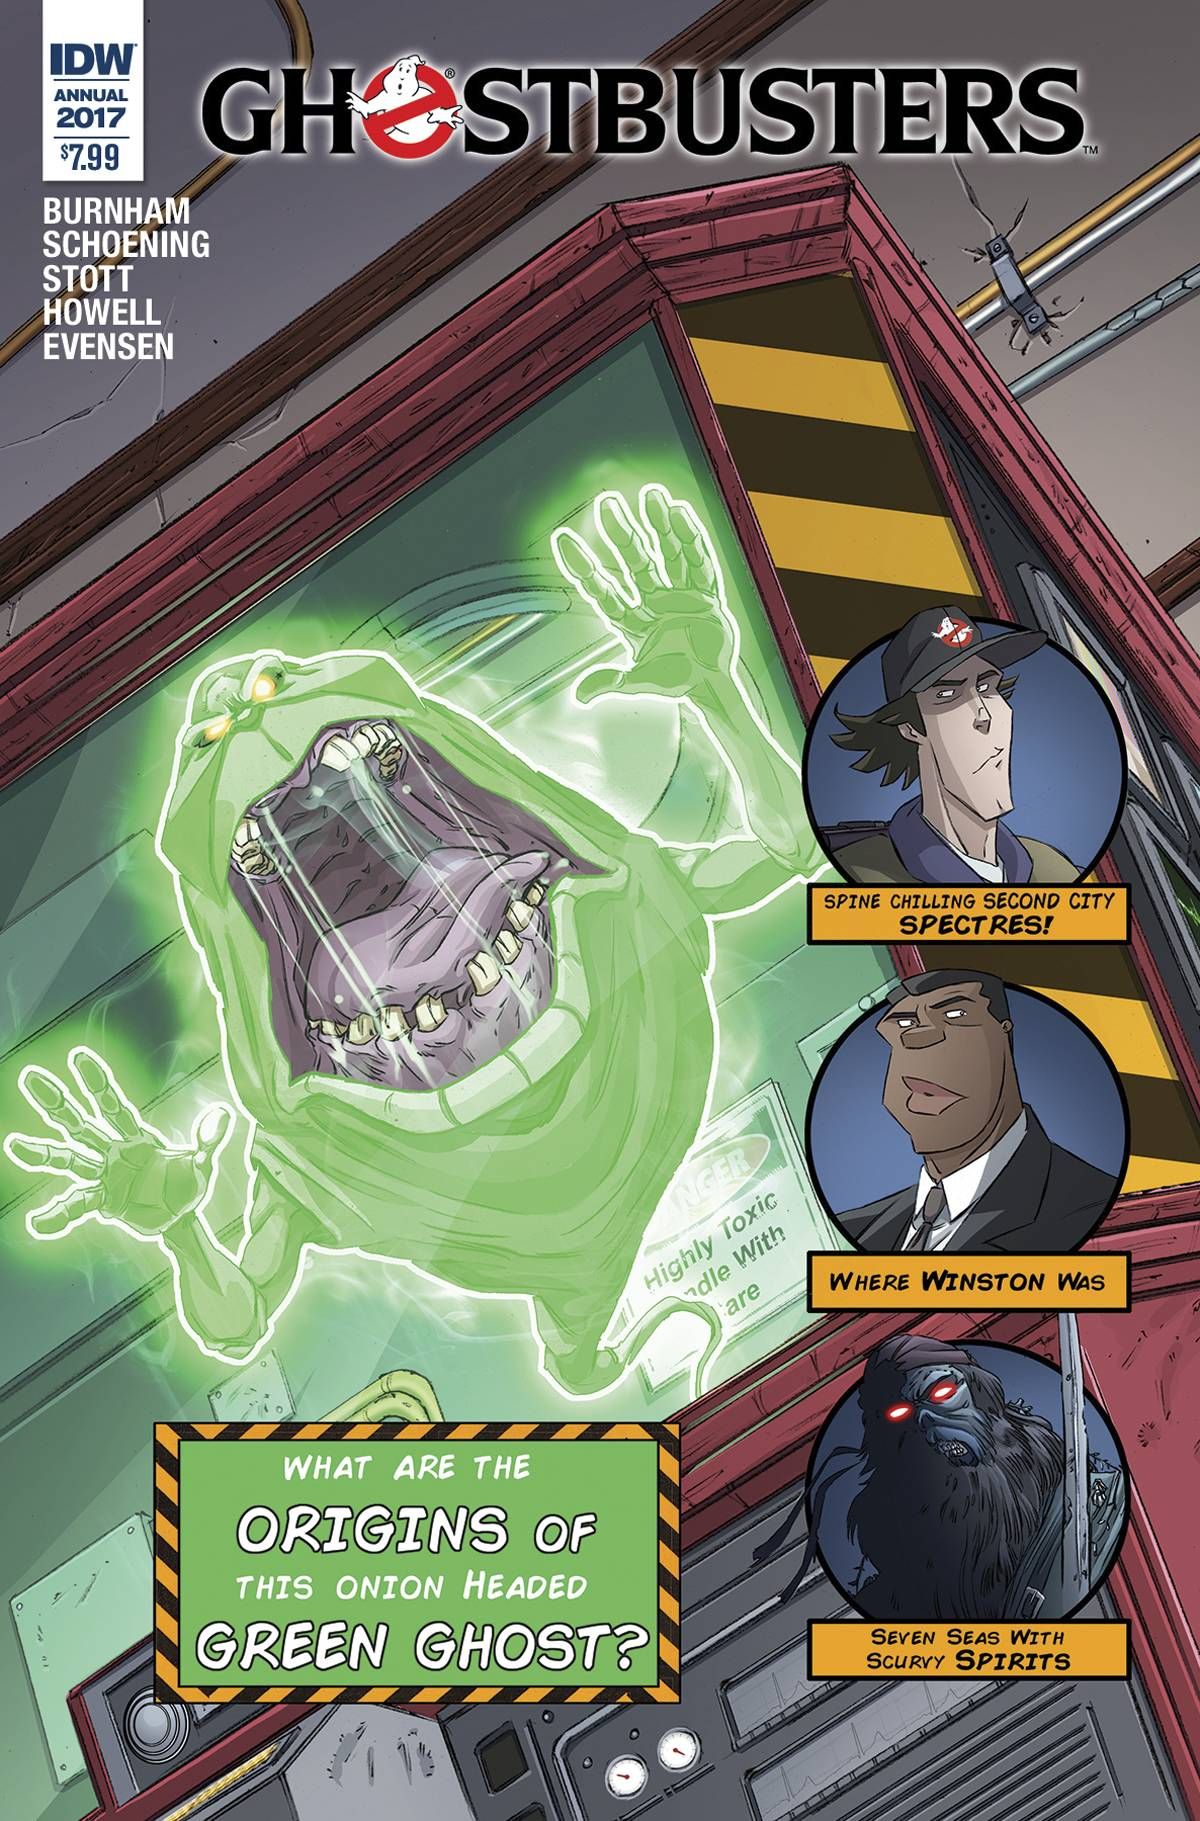 Ghostbusters Annual #2017 Comic